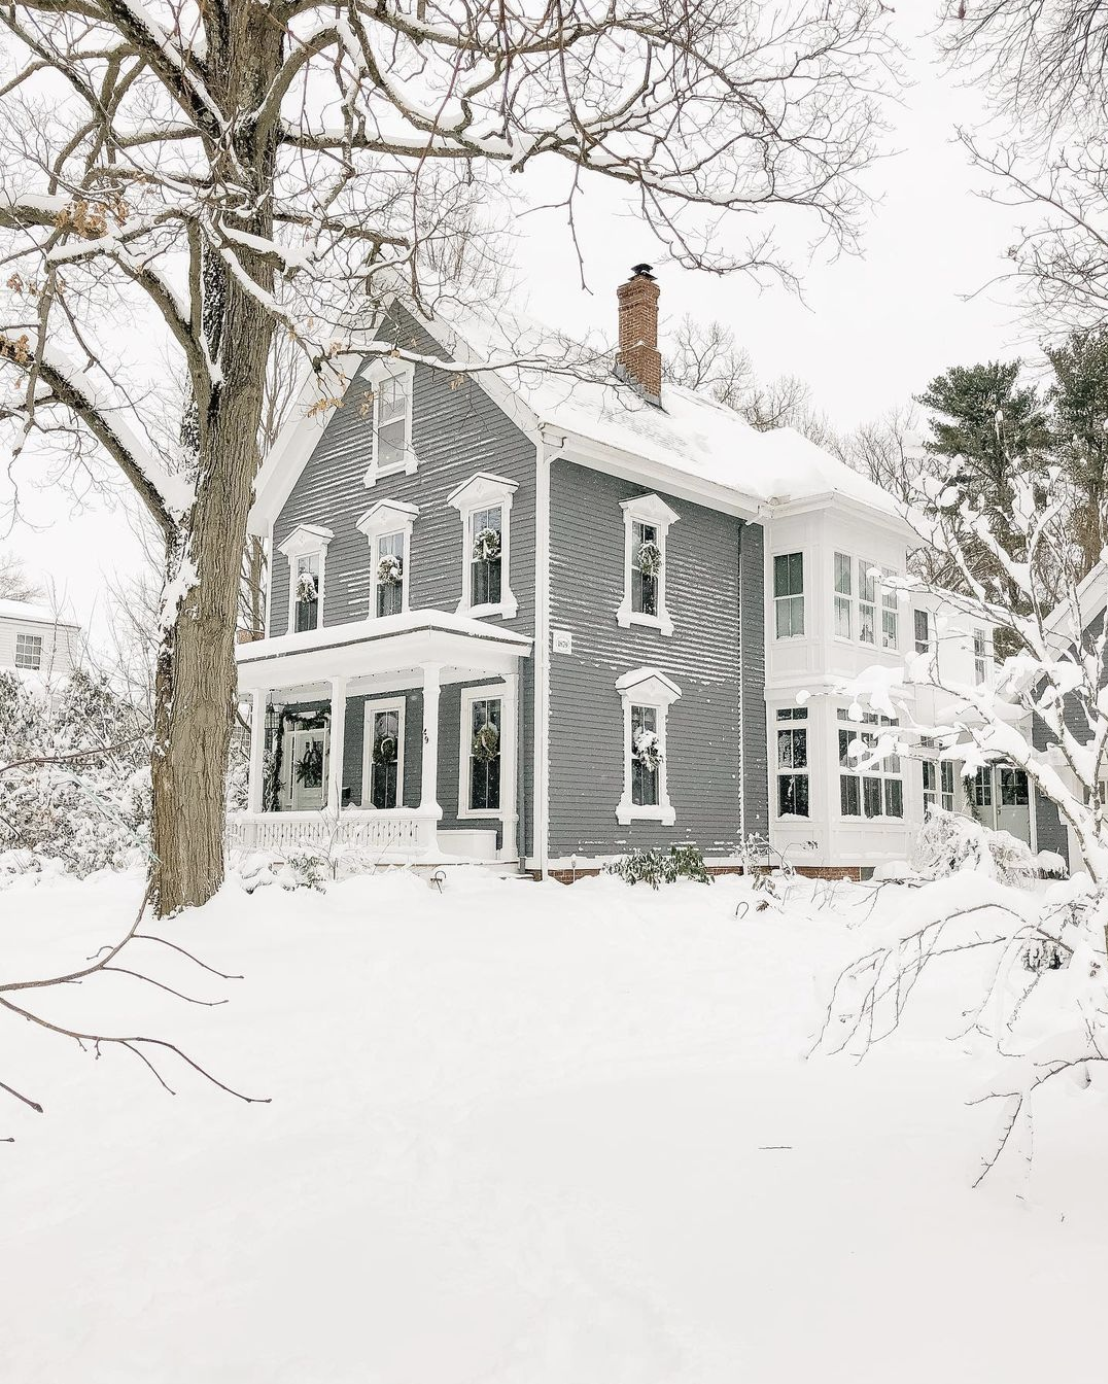 1879 home blanketed in snow 